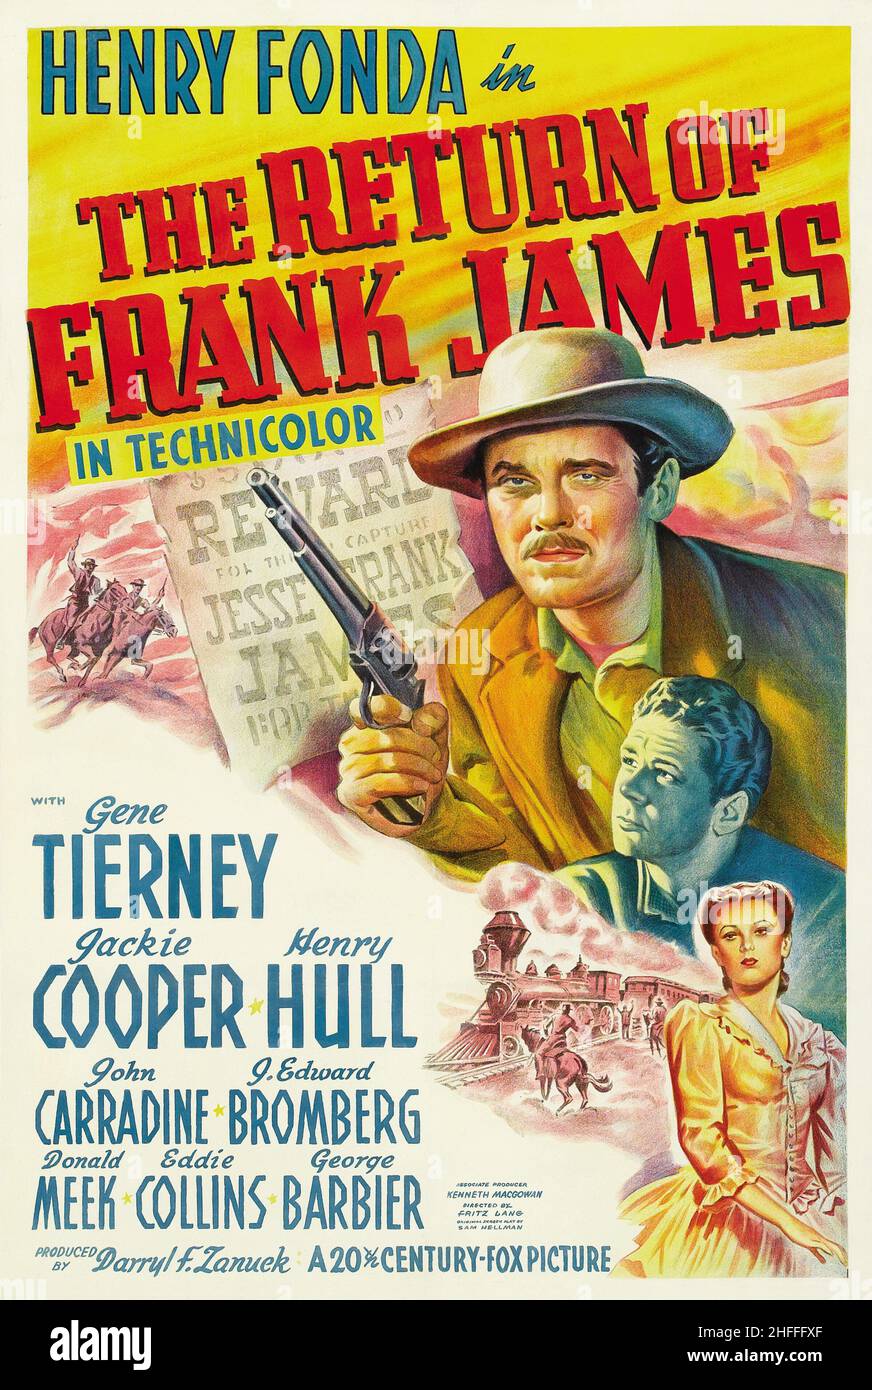 HENRY FONDA in THE RETURN OF FRANK JAMES (1940), directed by FRITZ LANG. Credit: 20TH CENTURY FOX / Album Stock Photo